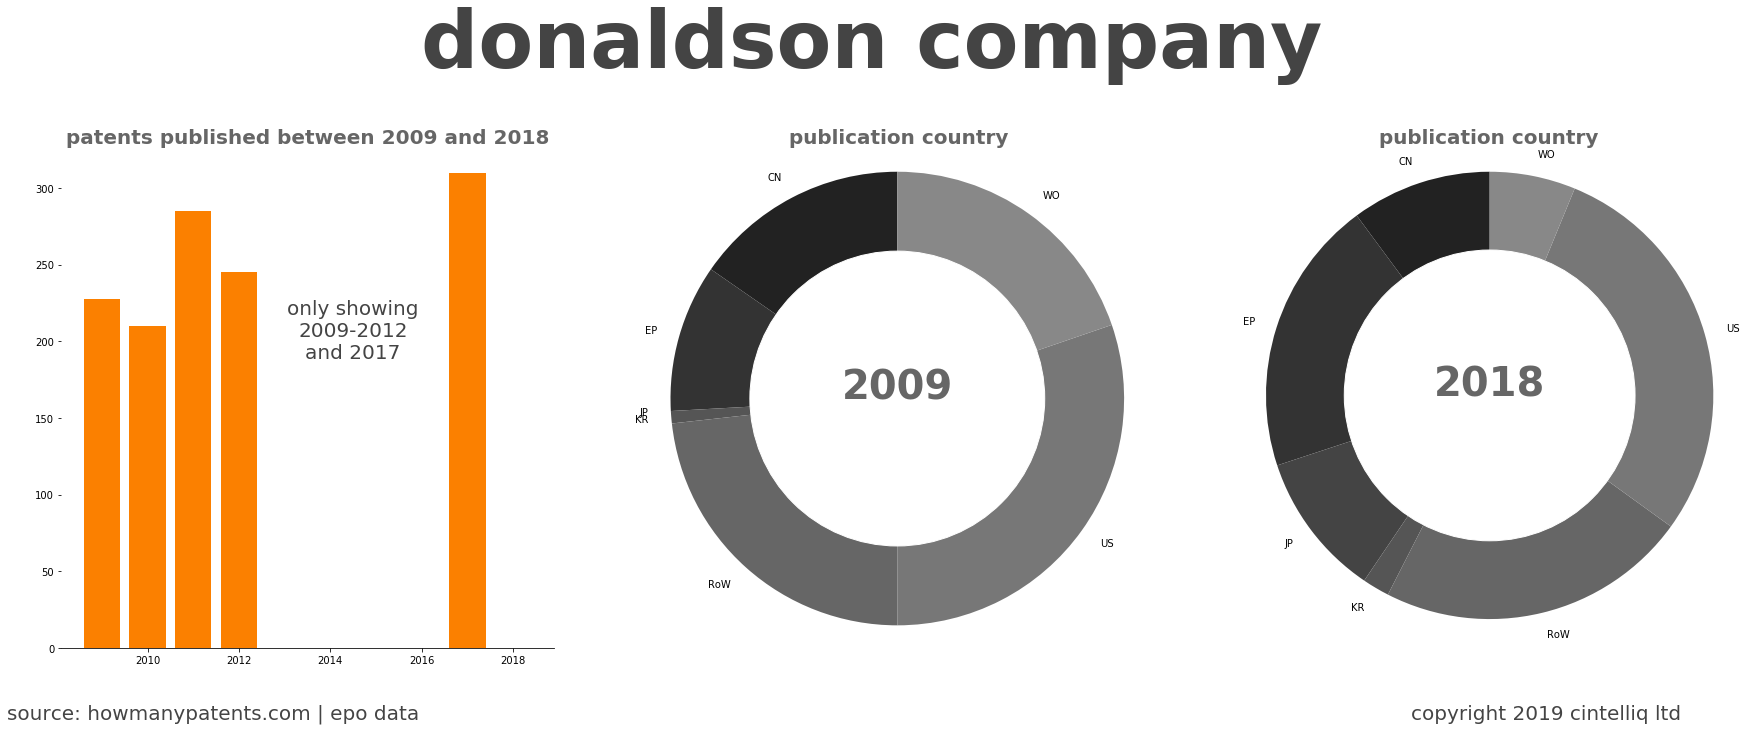 summary of patents for Donaldson Company